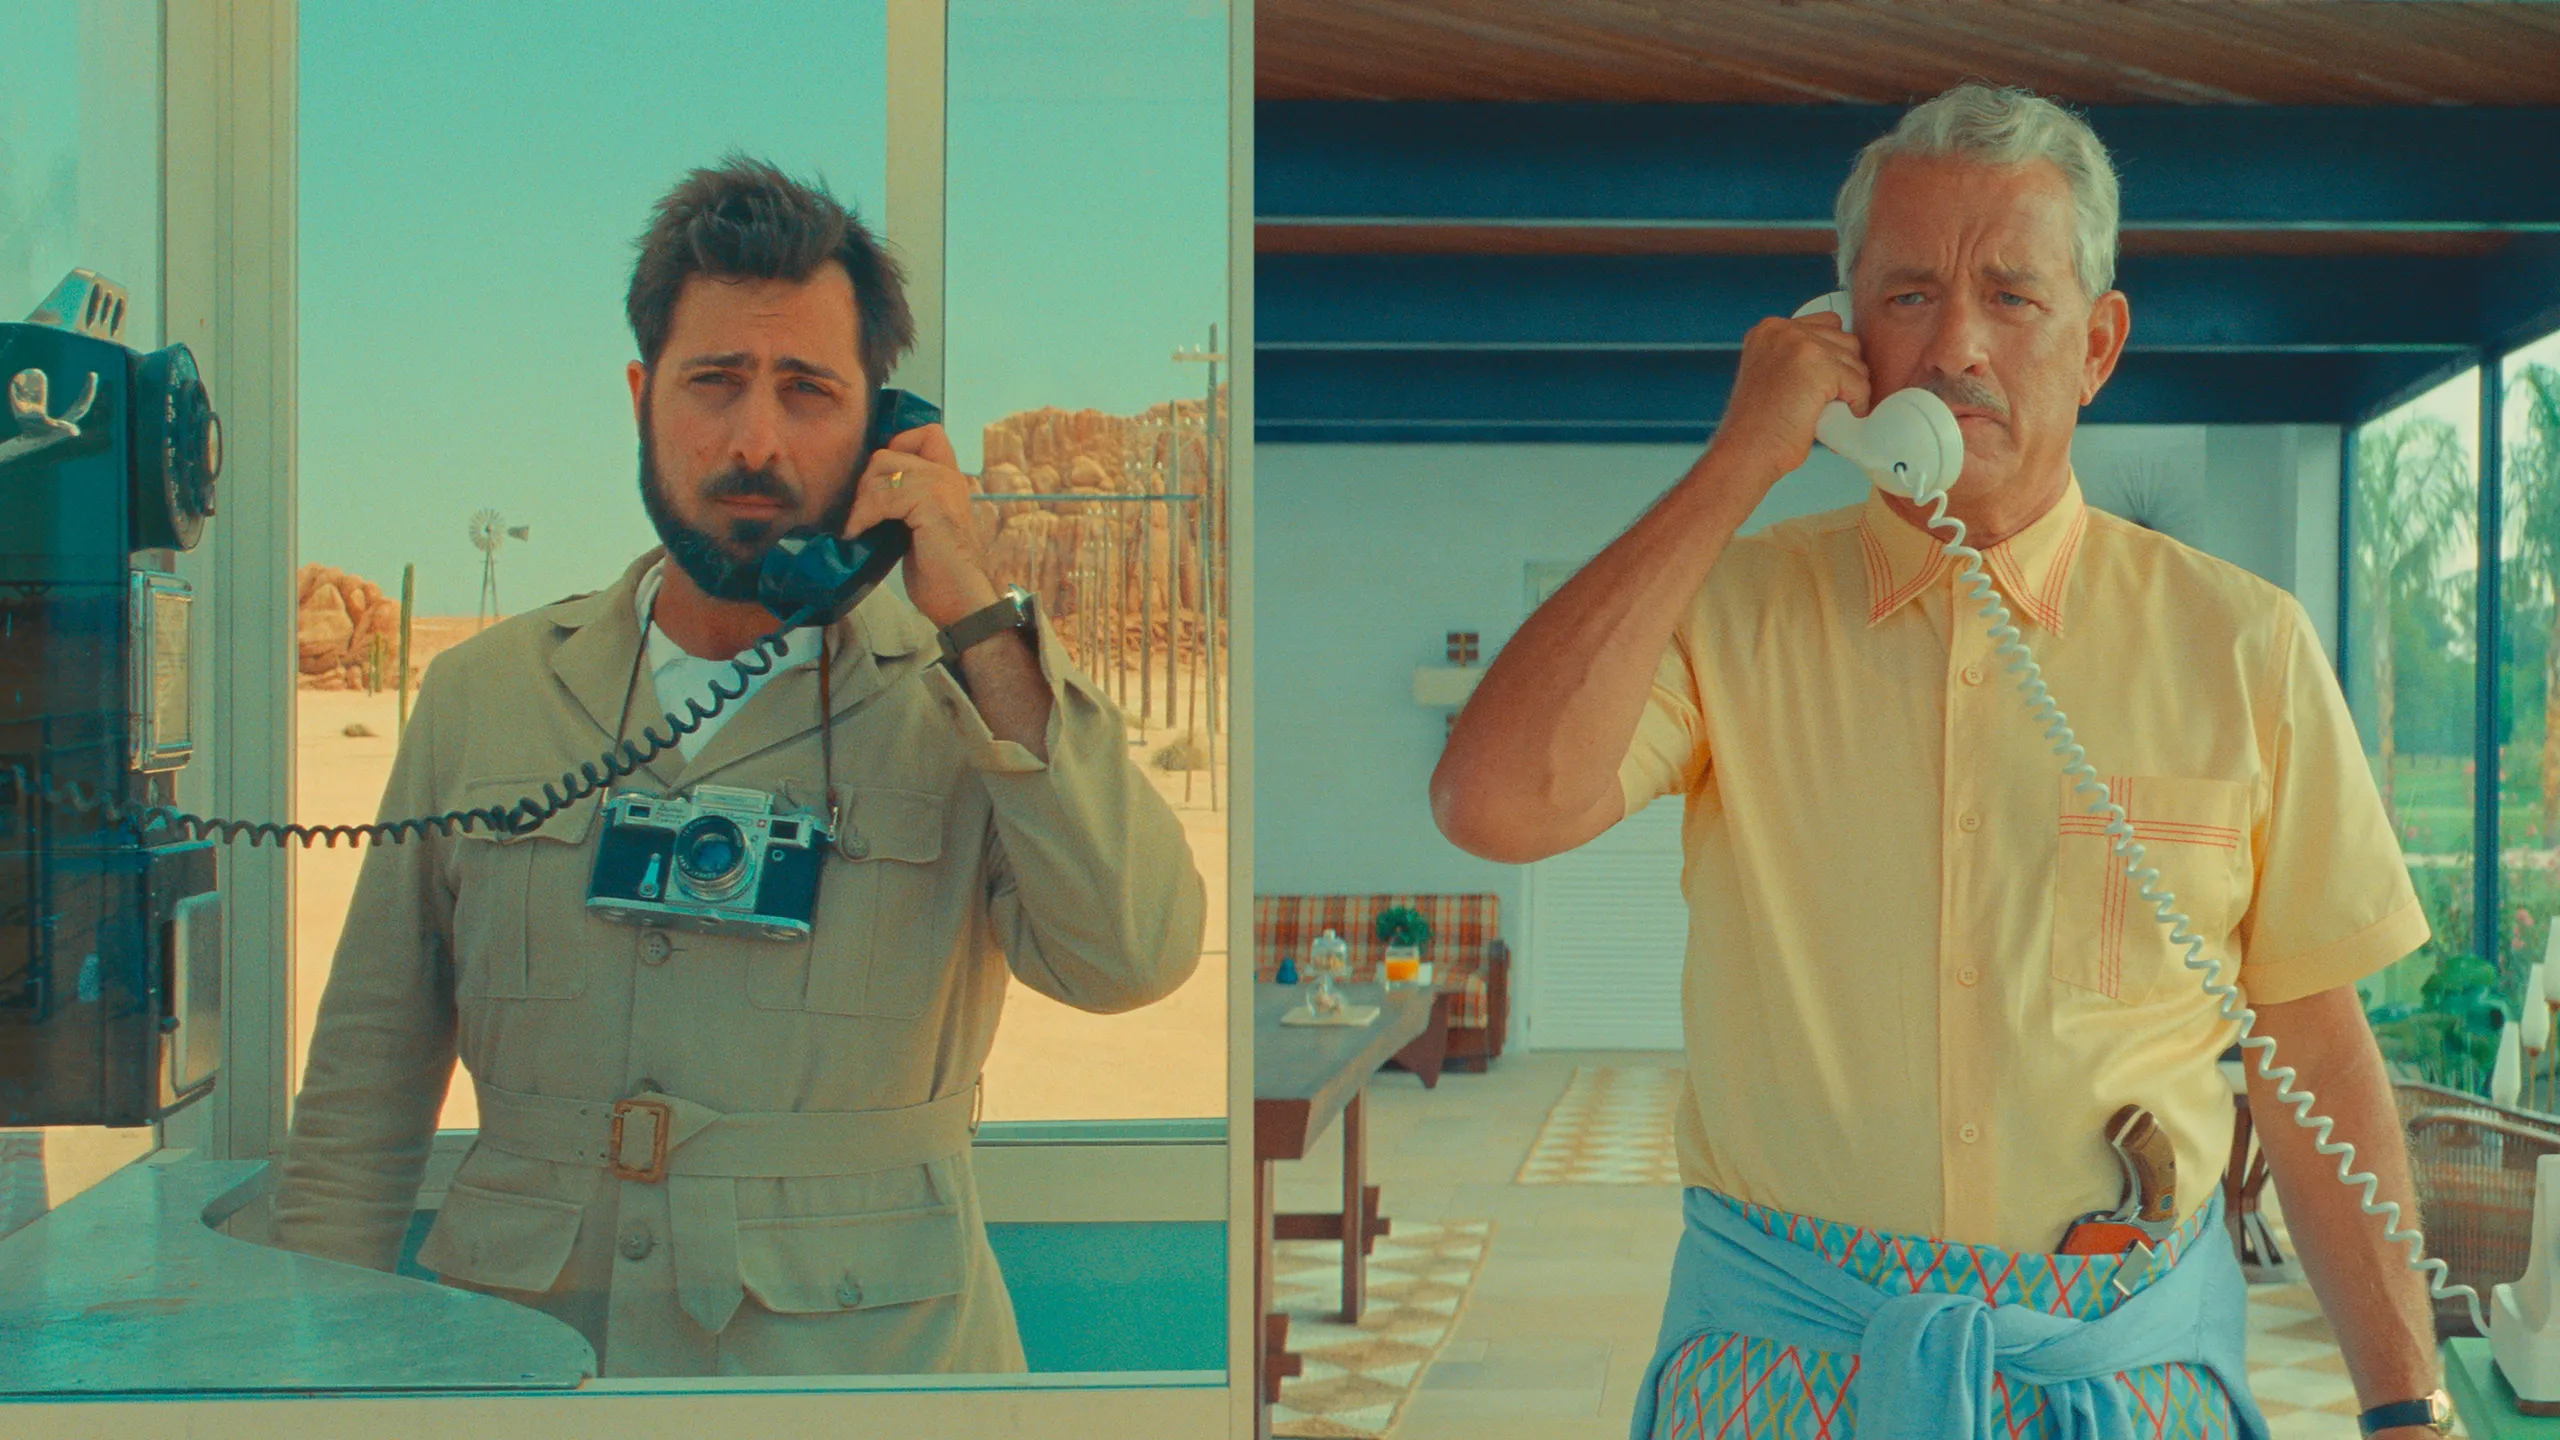 video editing like Wes Anderson